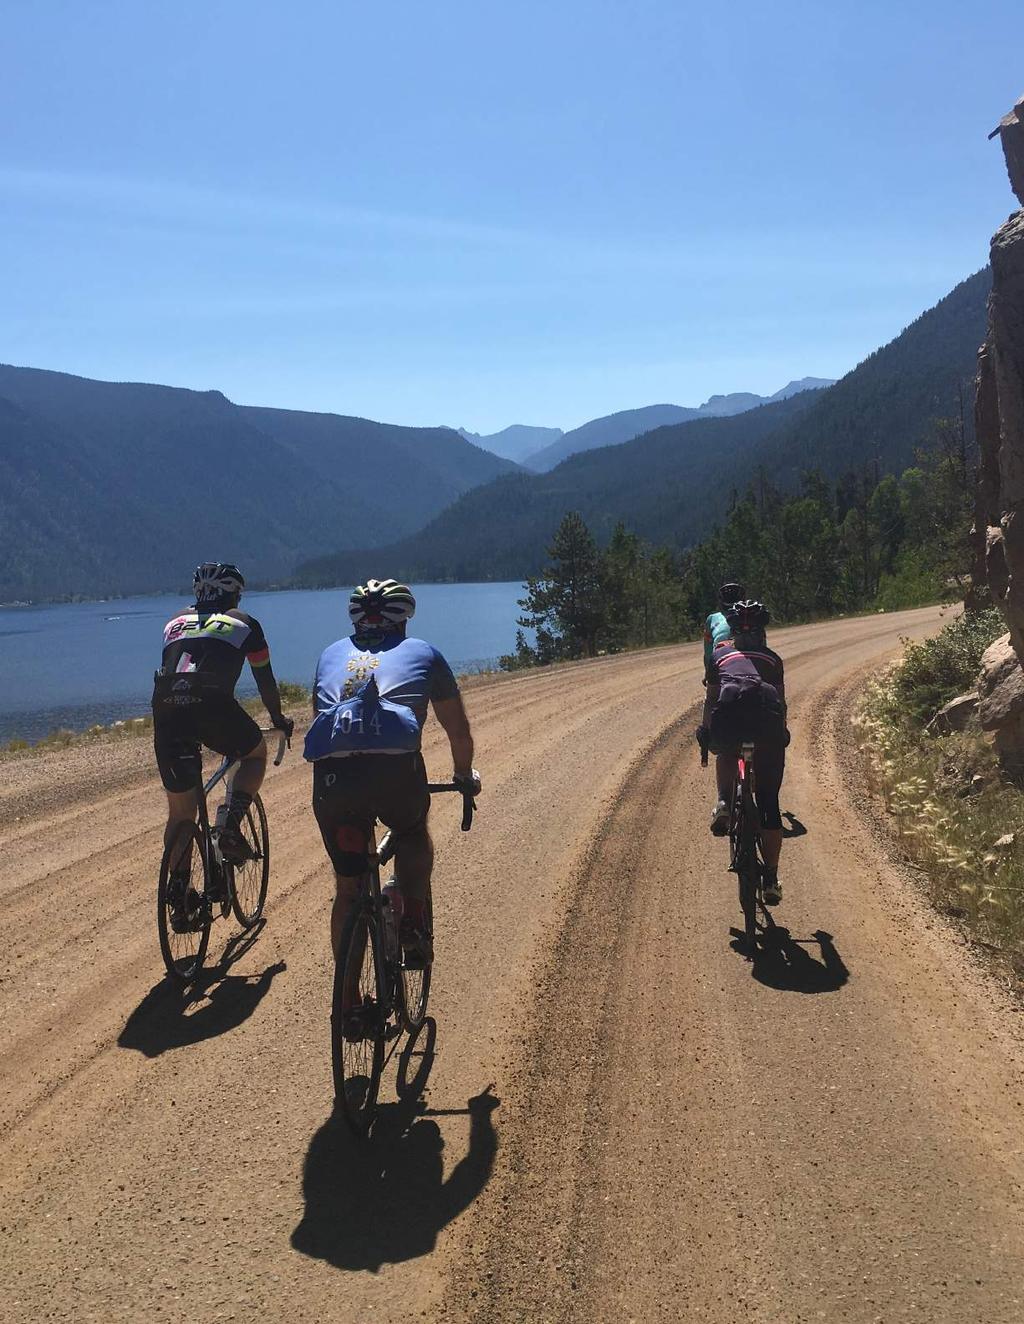 A Breathtaking Experience Our Colorado Rocky Mountains Tour gives you the opportunity to ride on some of North America's highest roads and experience the rugged beauty of the Colorado Rockies.